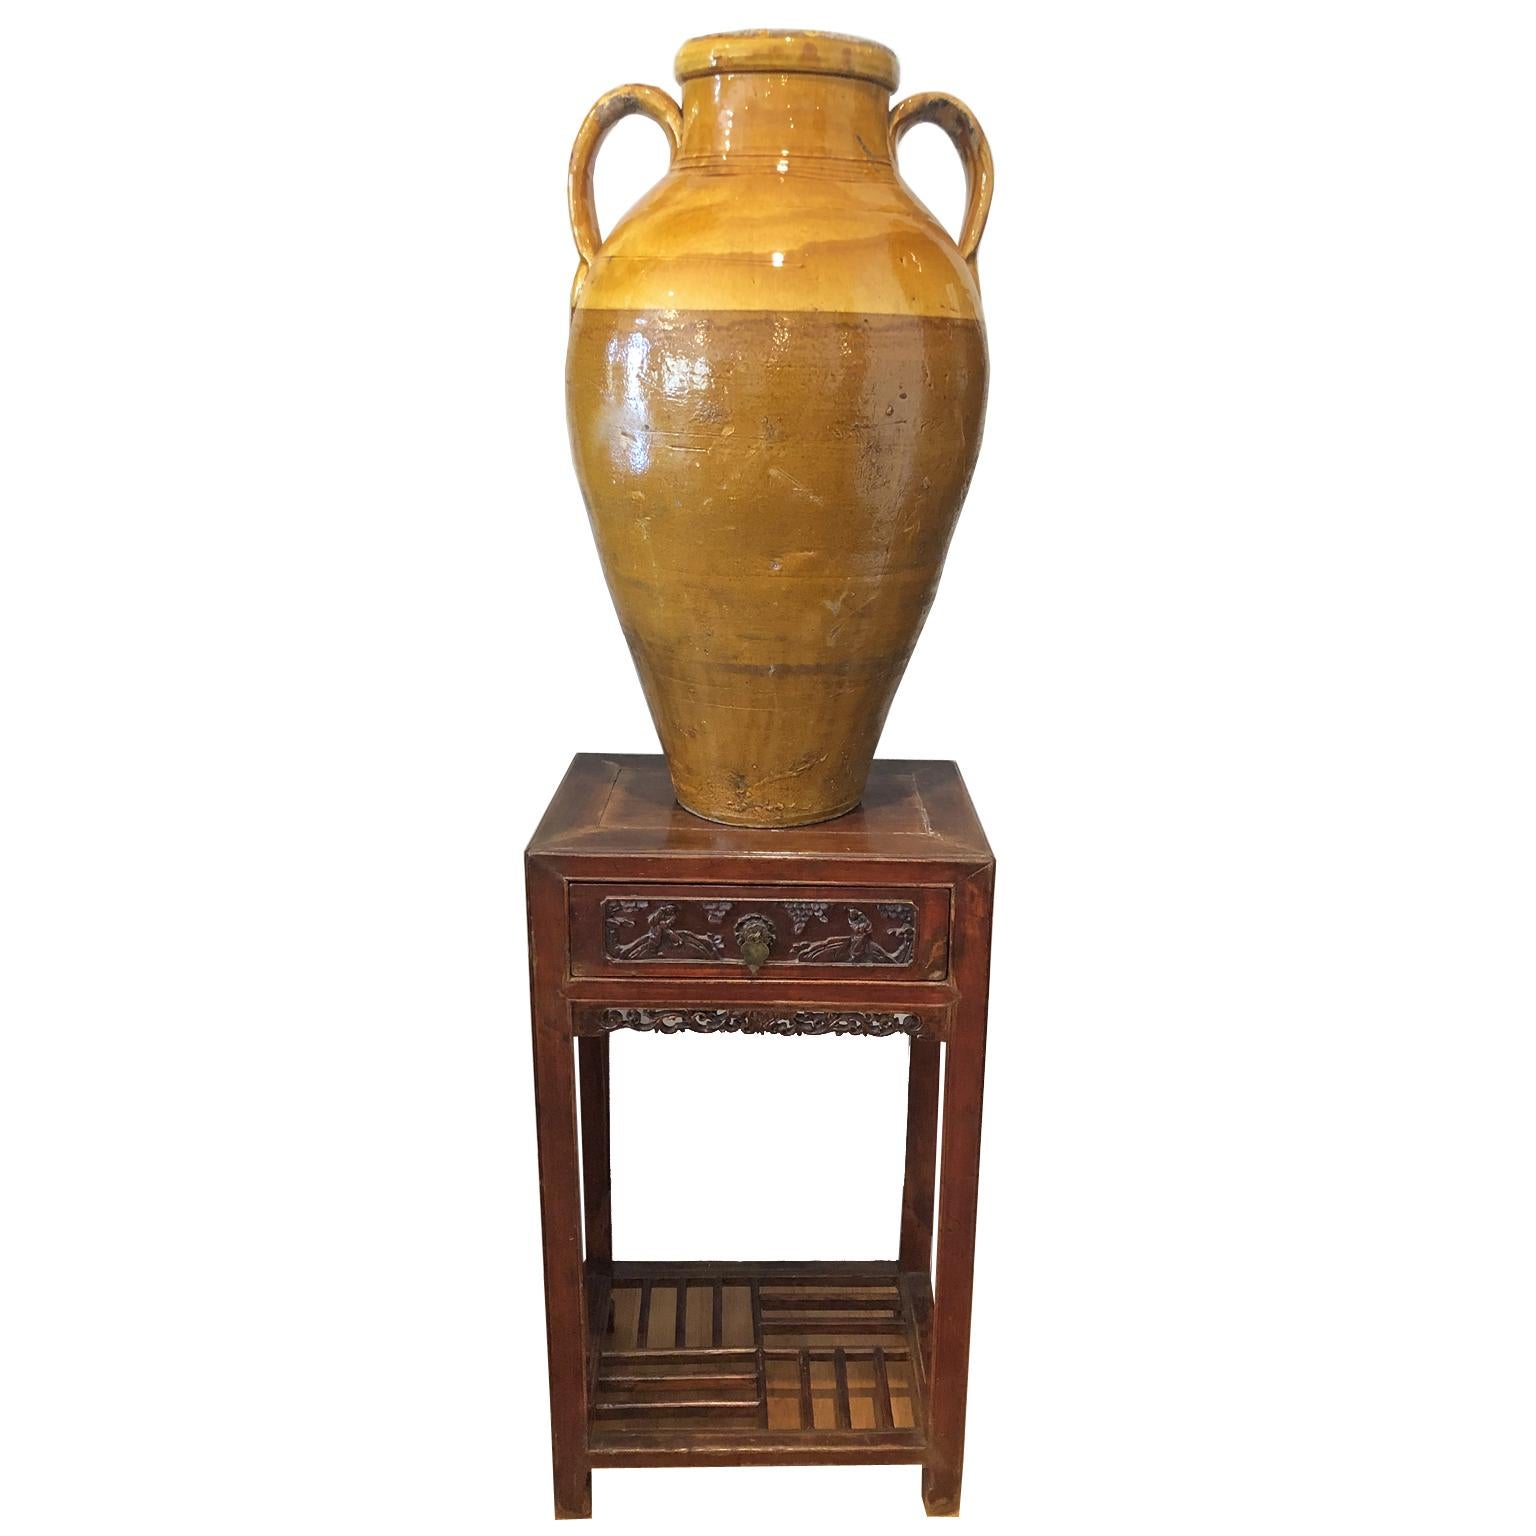 French Provincial 19th Century Large French Terracotta Urn or Pot with Brown and Yellow Glazing